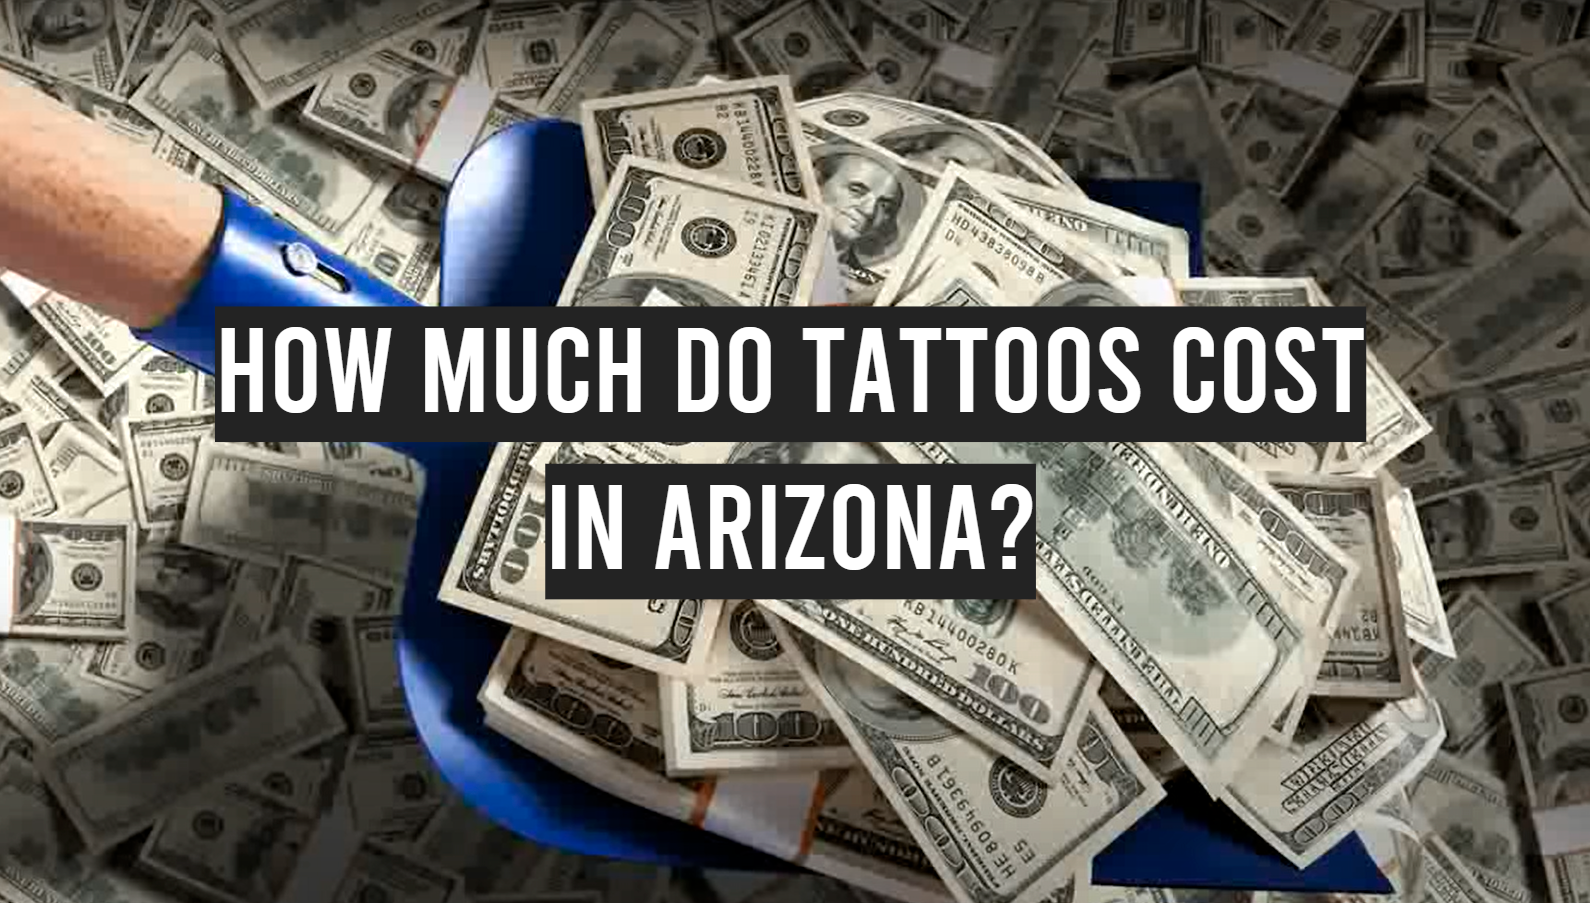 How Much Do Tattoos Cost in Arizona?